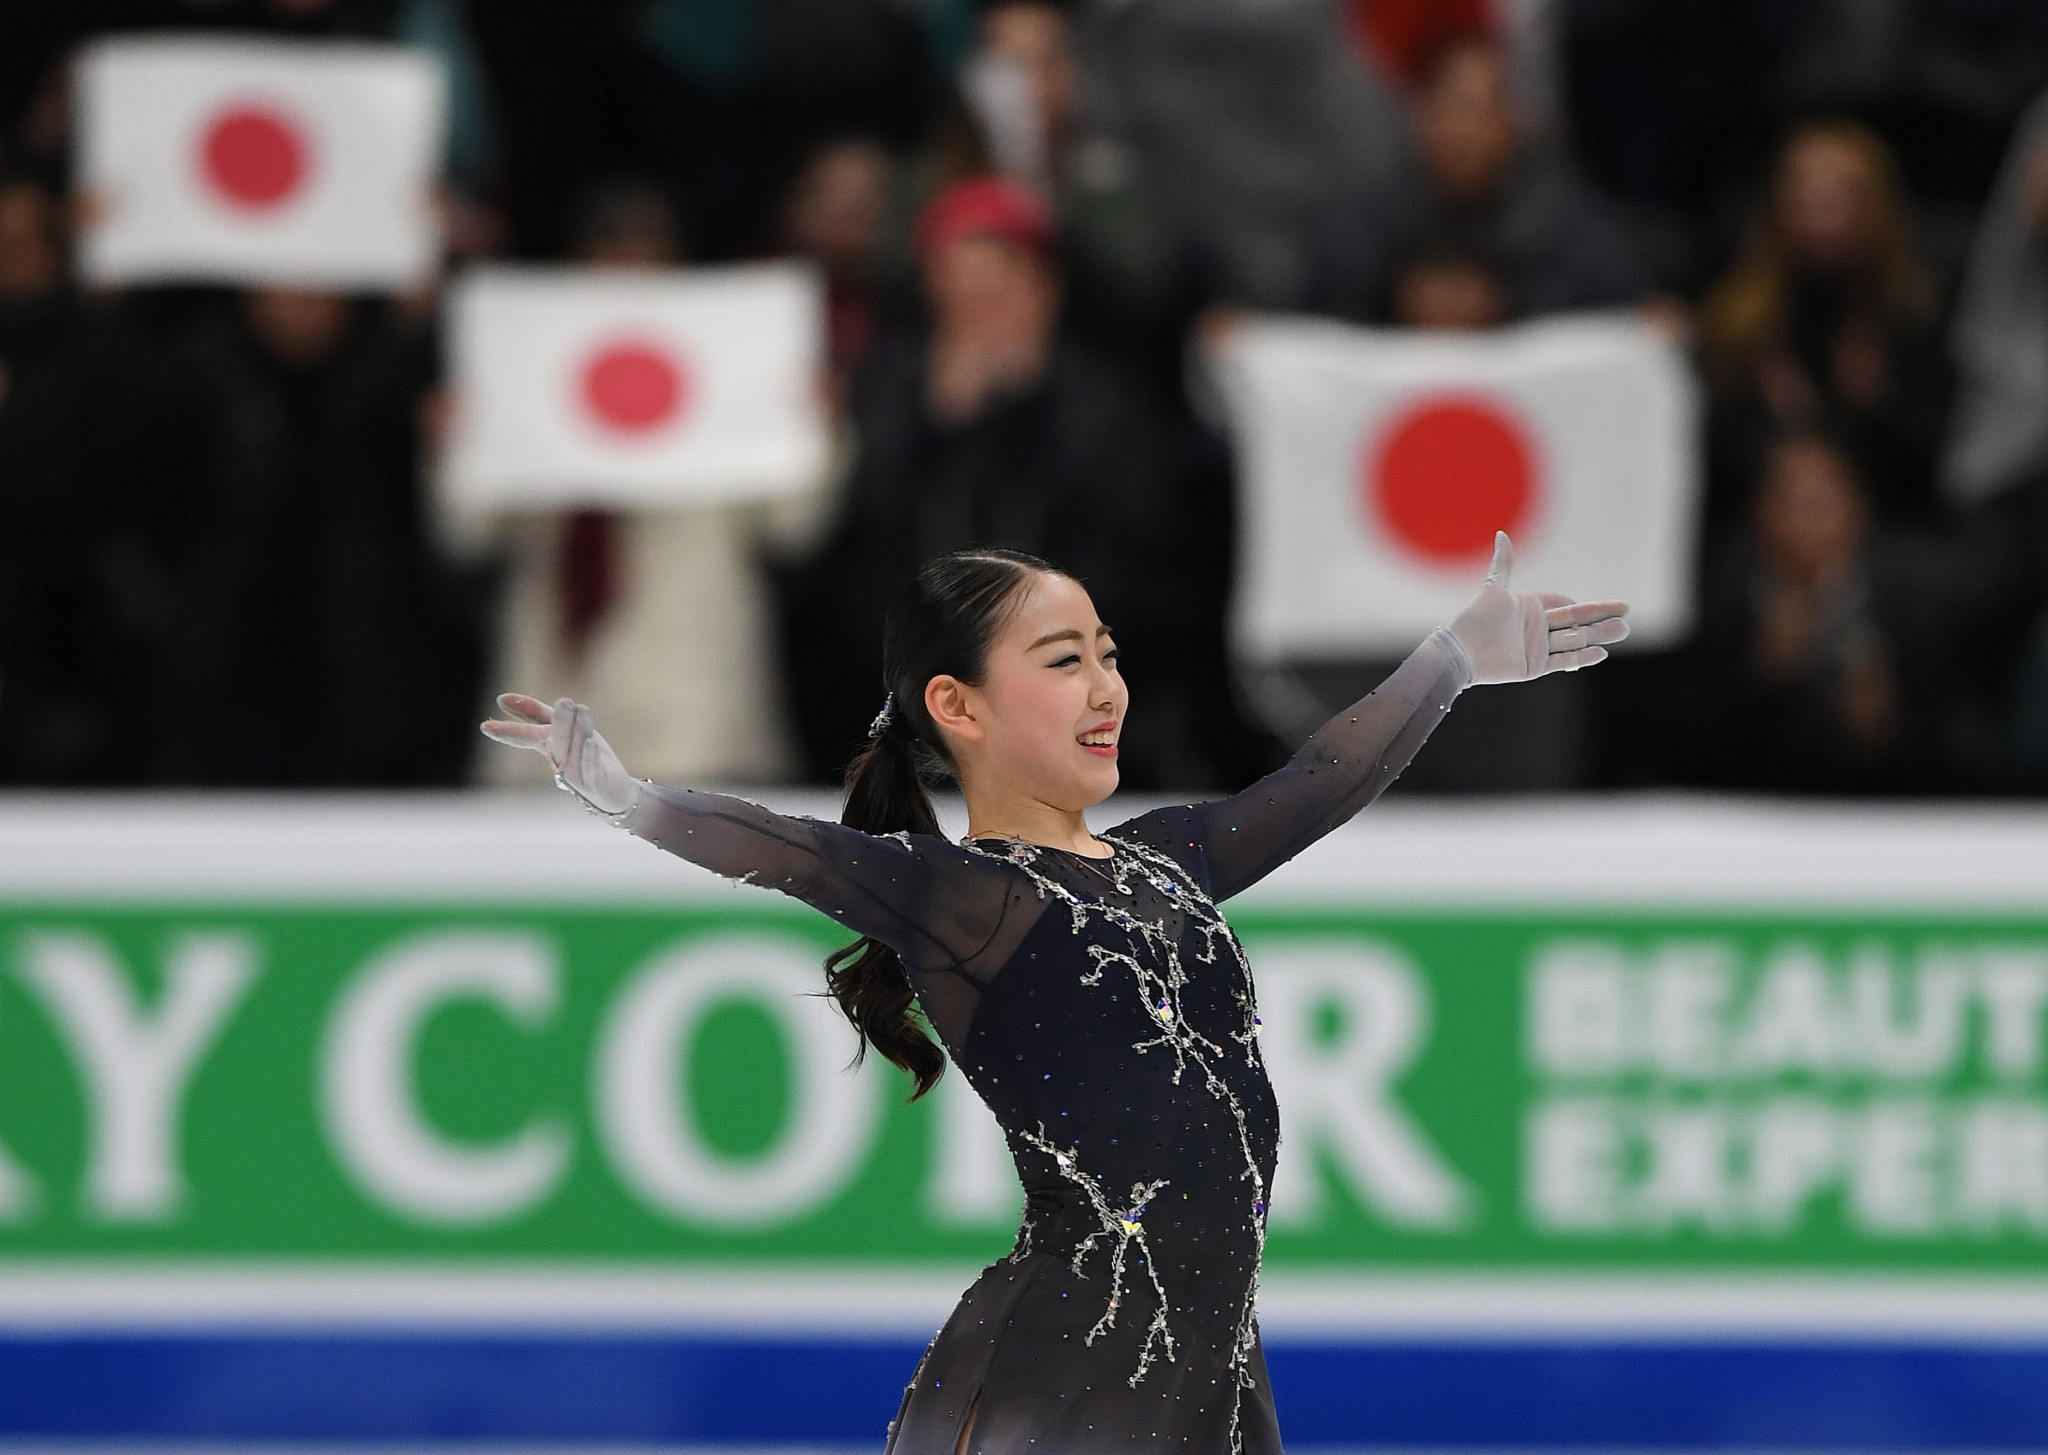 Kihira impresses in free skate to triumph at ISU Four Continents Figure Skating Championships